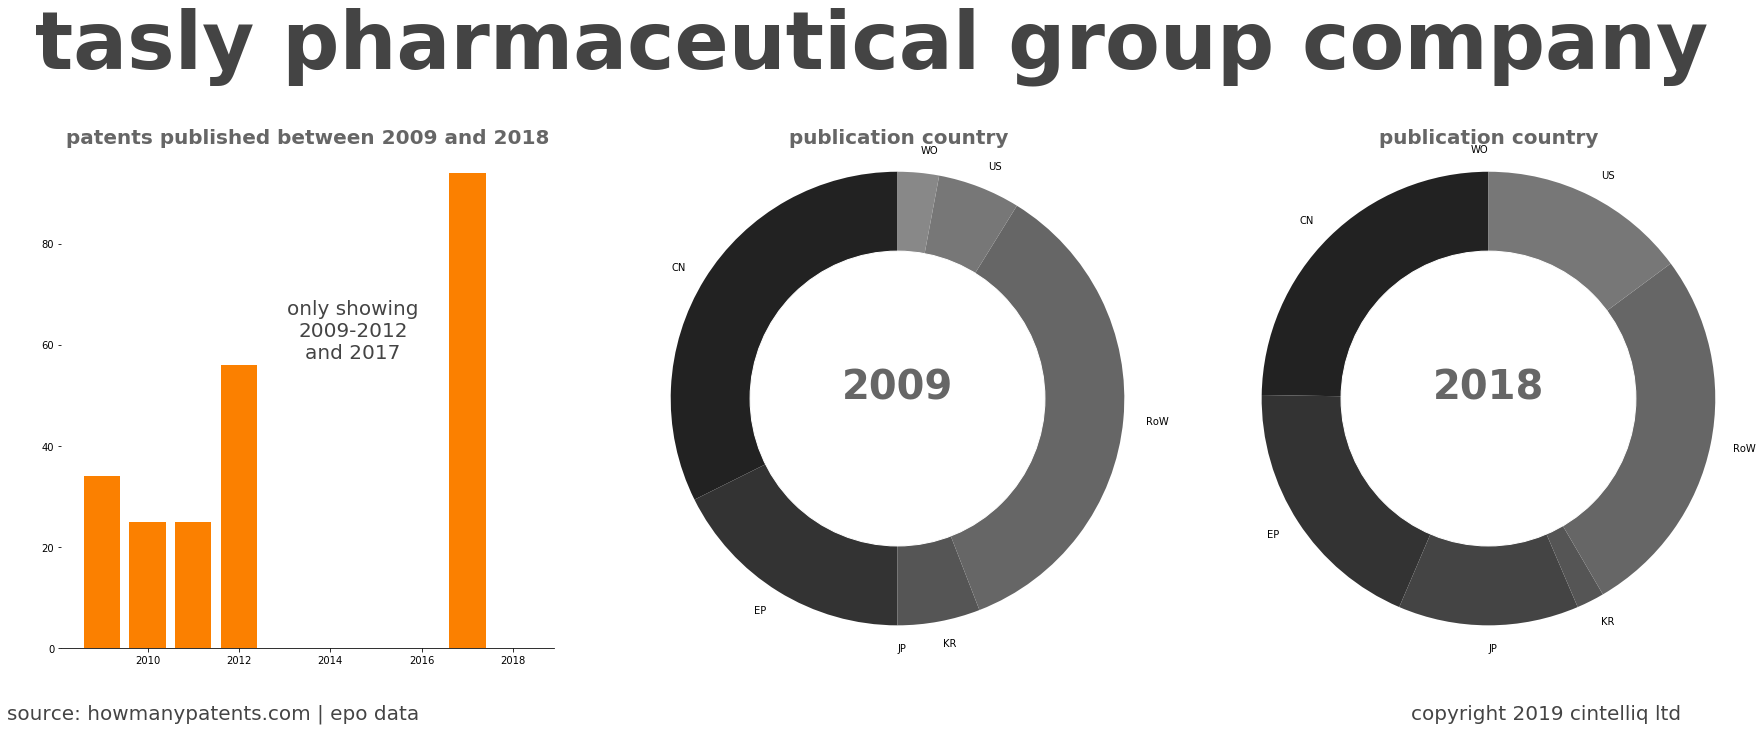 summary of patents for Tasly Pharmaceutical Group Company